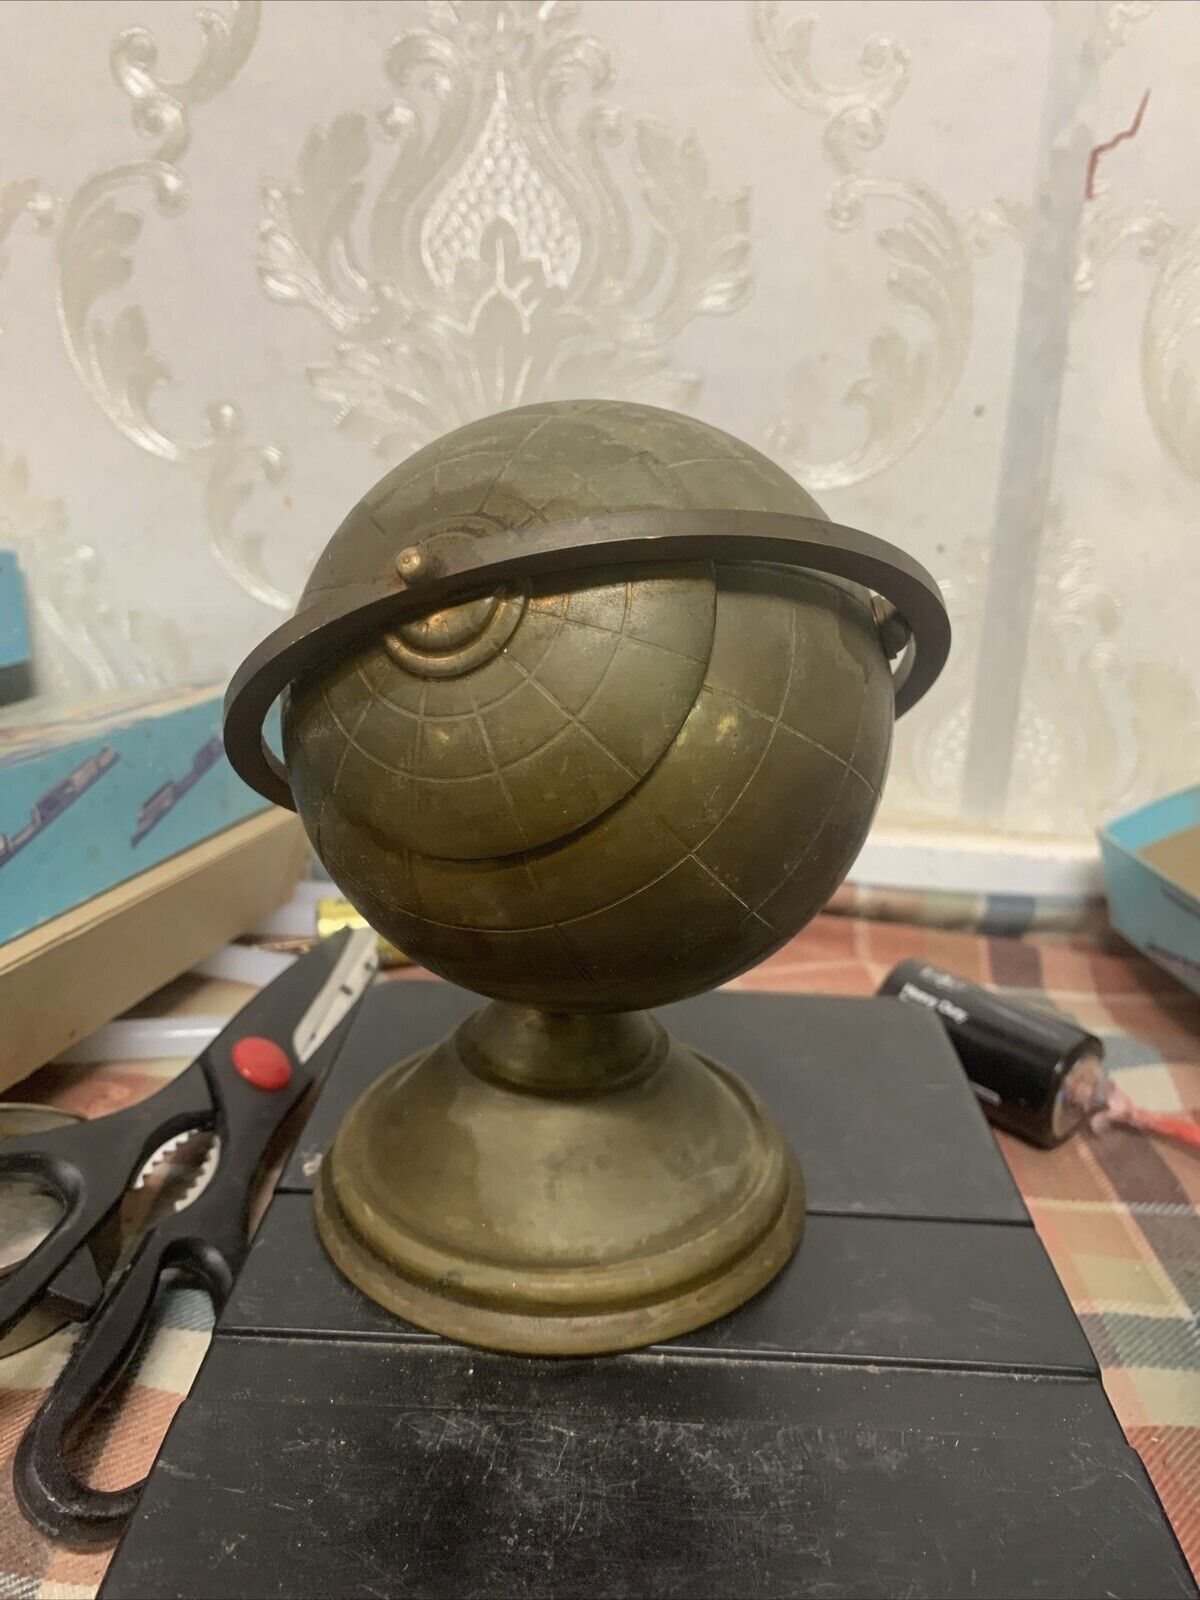 VINTAGE BRASS GLOBE ASHTRAY TABLE OFFICE DECOR SECRET STASH COMPLETE WITH TRAY